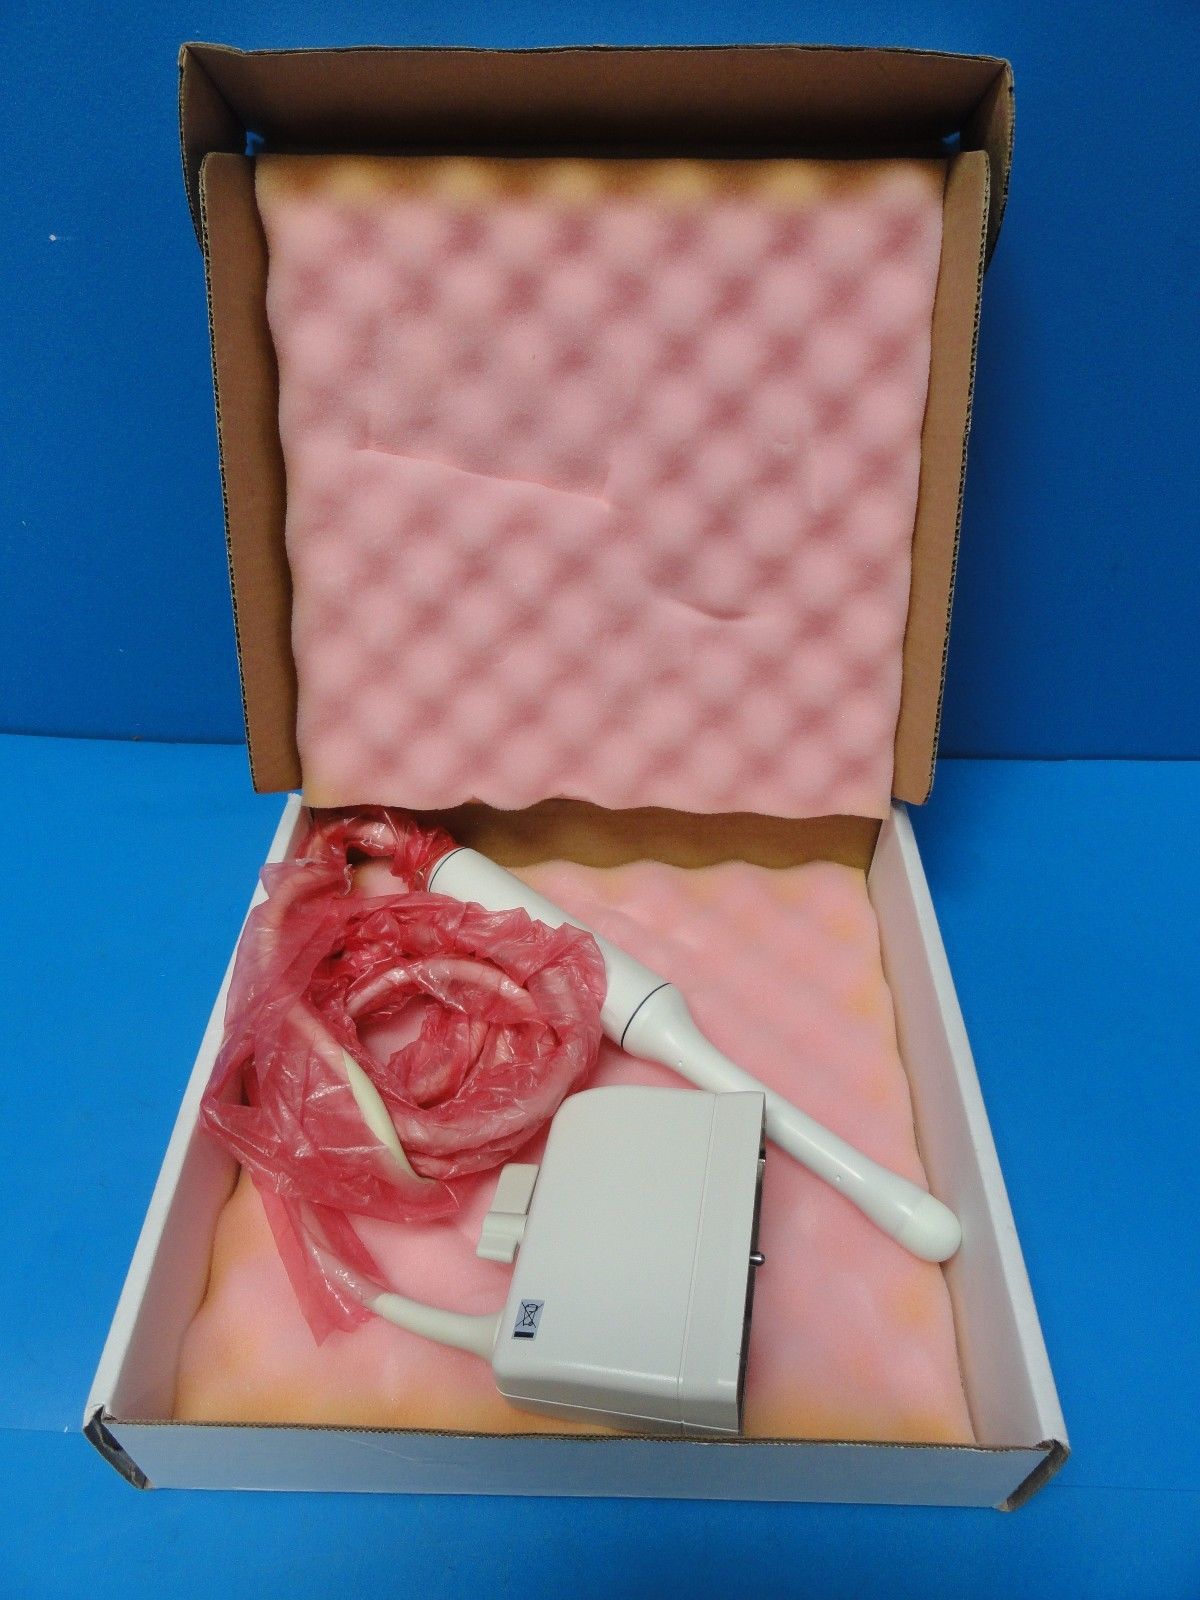 ATL PHILIPS 3D8-5V 3D CURVED ARRAY TRANSVAGINAL PROBE For ATL HDI 4000 (8193) DIAGNOSTIC ULTRASOUND MACHINES FOR SALE